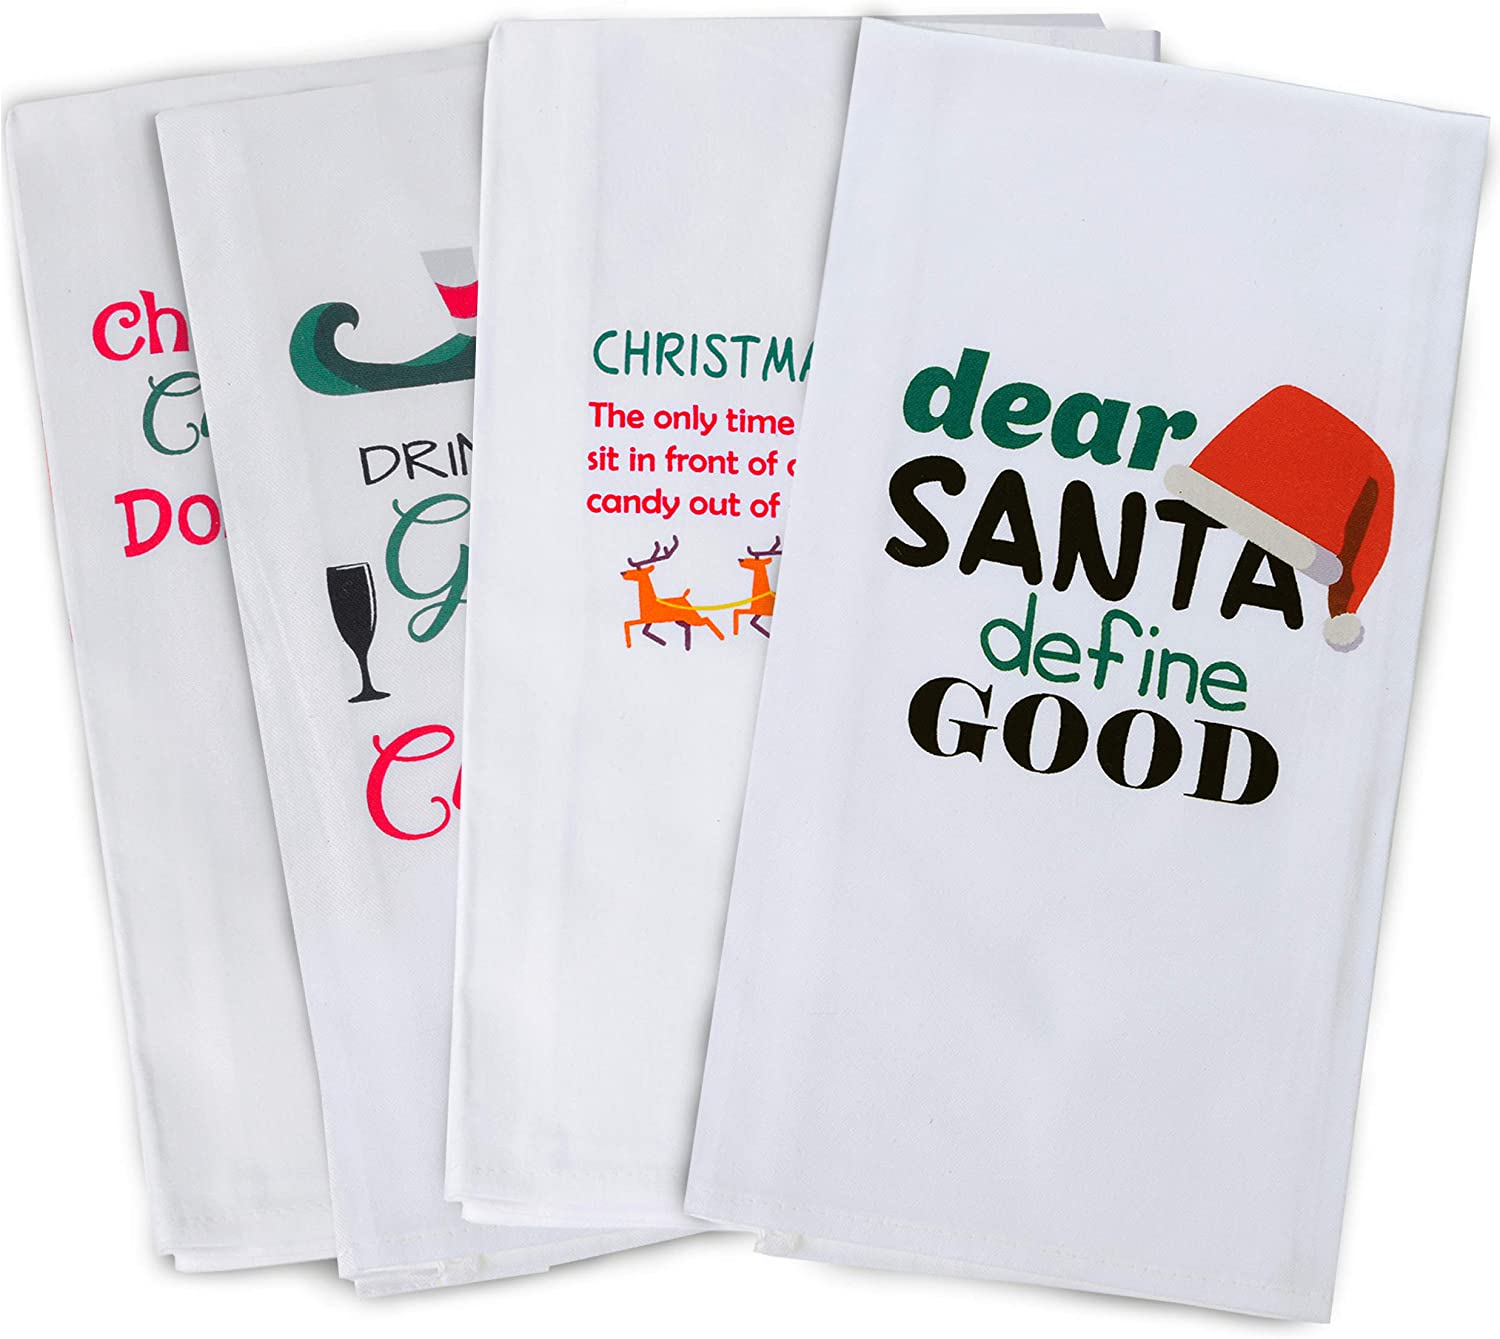 https://www.wideopencountry.com/wp-content/uploads/sites/4/eats/2021/03/Christmas-Towels-Gifts-Set-Funny-Christmas-Towels-Make-Great-Present-or-Christmas-Decorations-Christmas-Themed-White-Hand-Towels-for-Bathroom-or-Decorative-Christmas-Kitchen-Towel-.jpg?resize=1500%2C1339